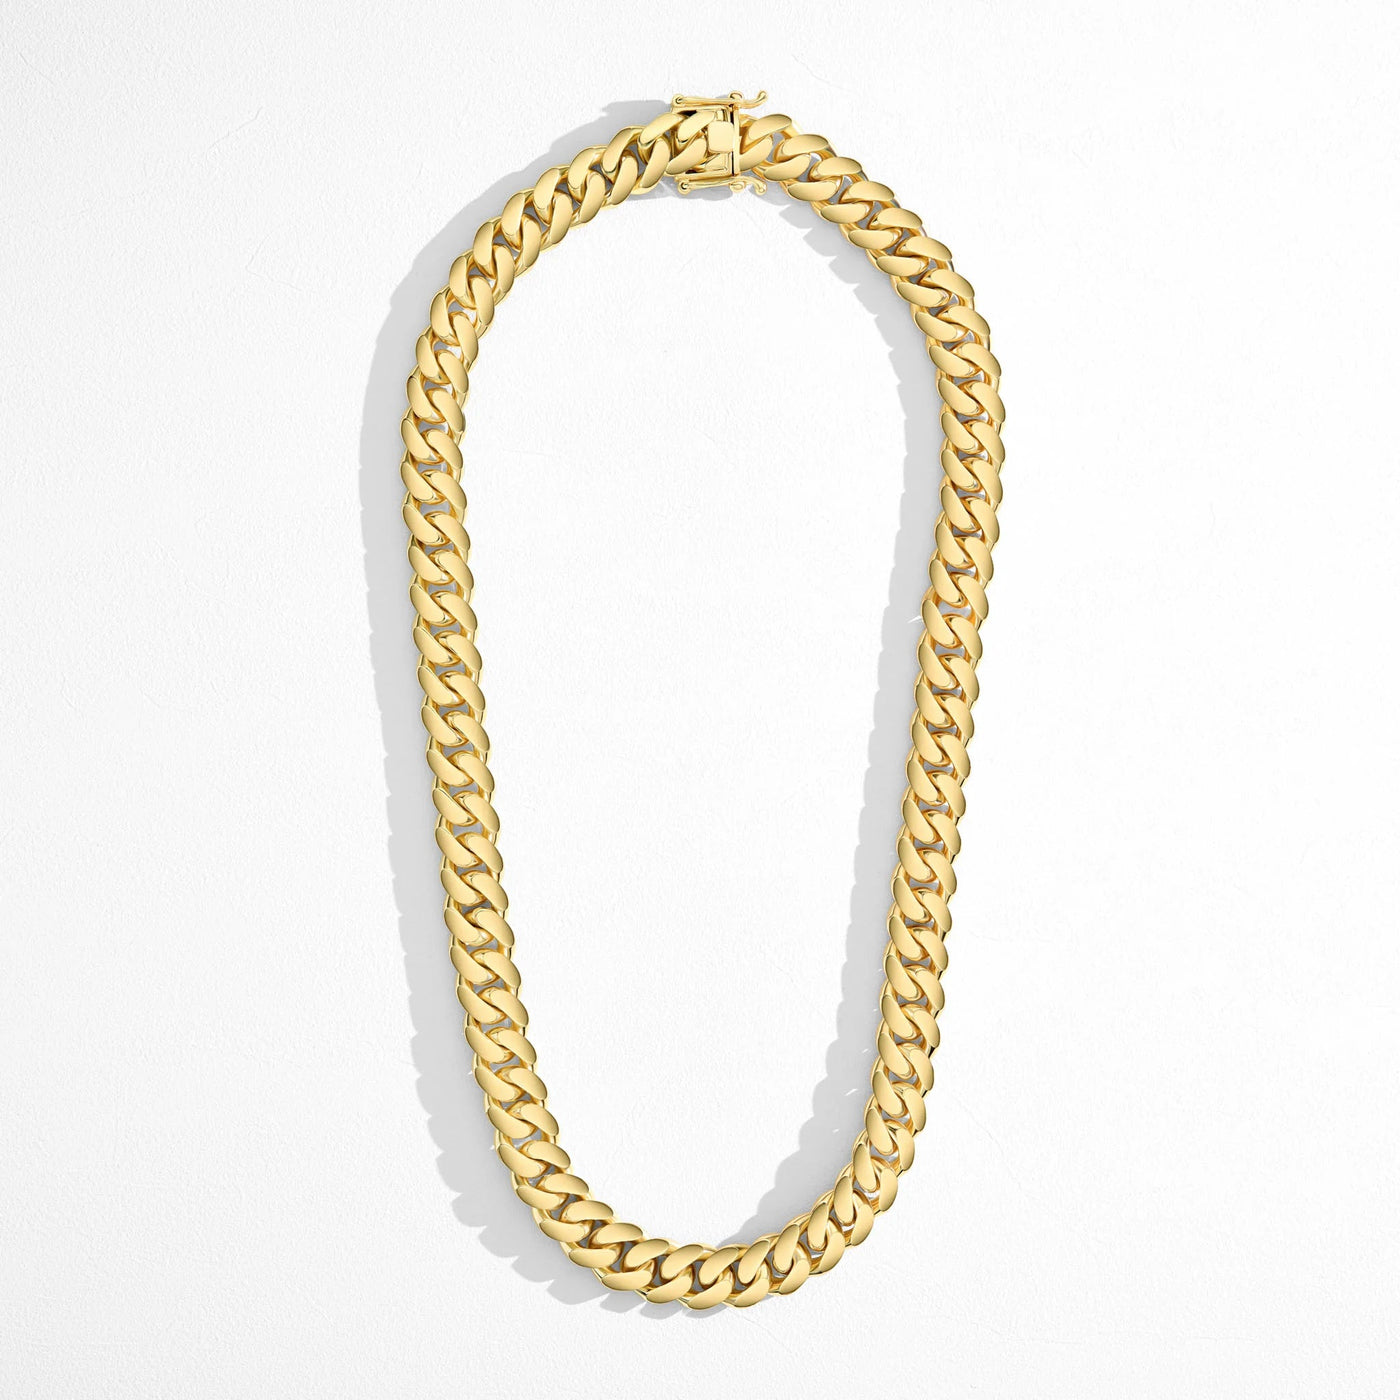 Solid 14K Gold Cuban Link Chain - 12MM 